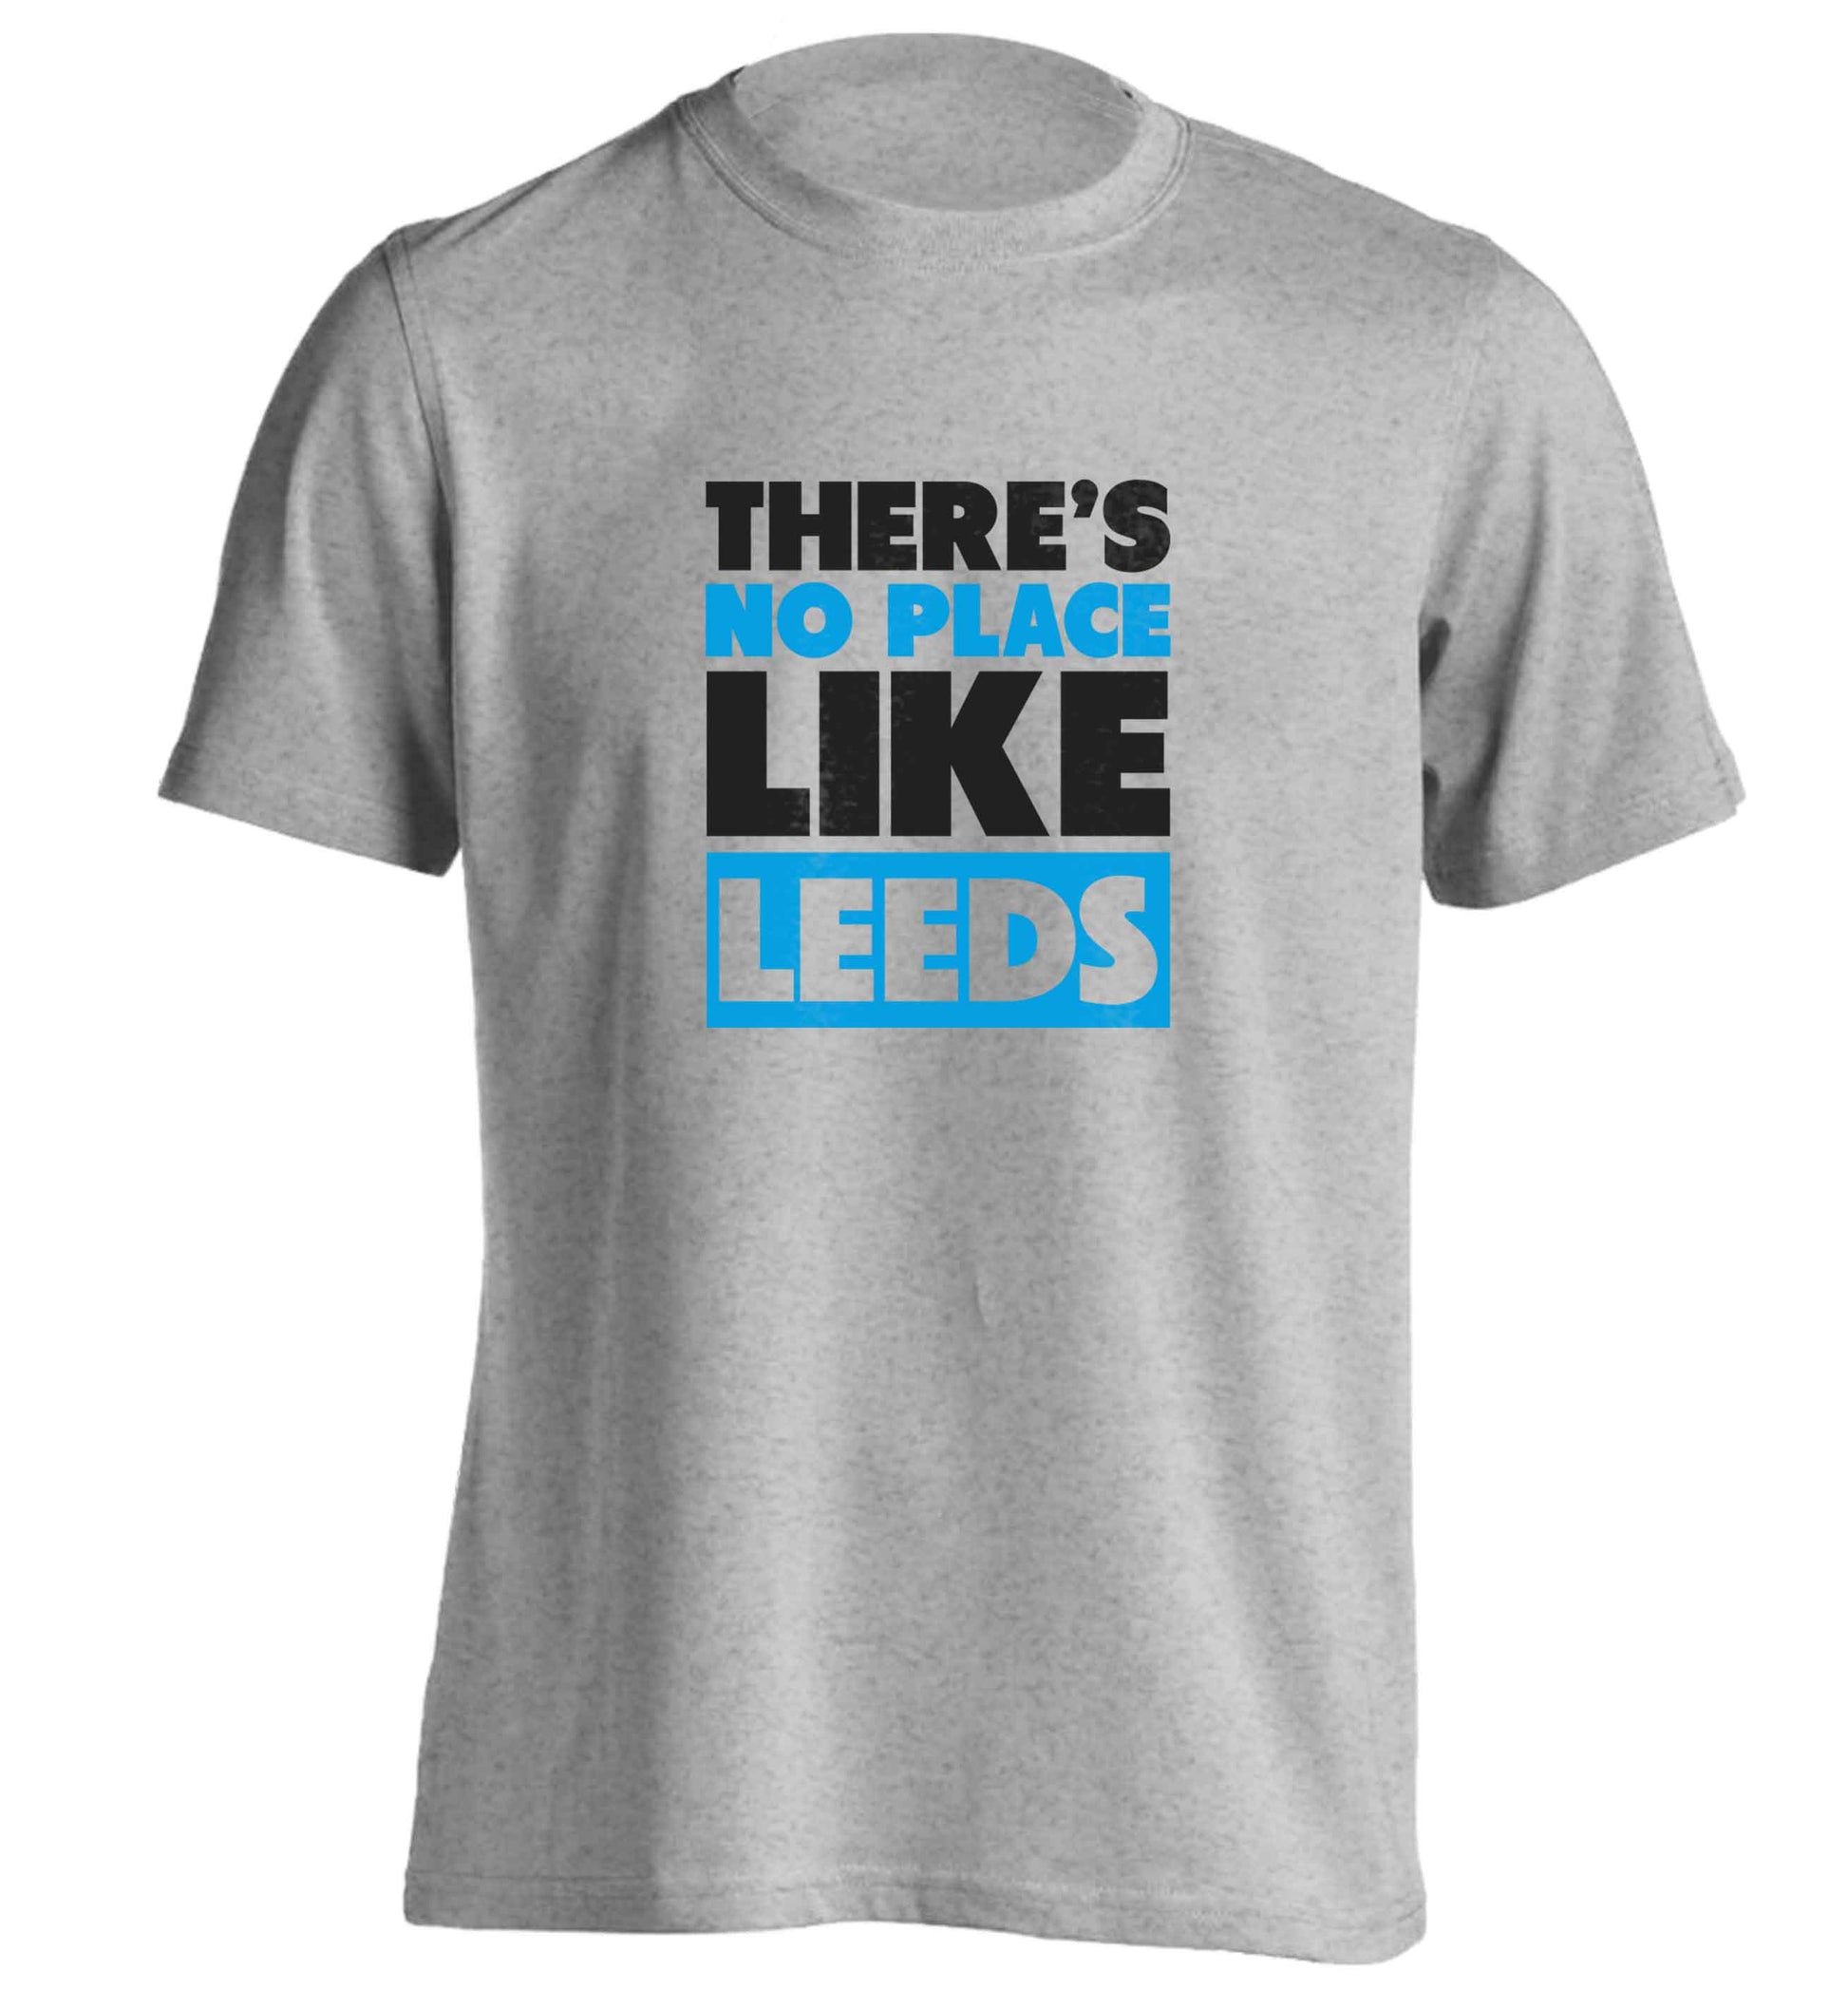 There's no place like Leeds adults unisex grey Tshirt 2XL